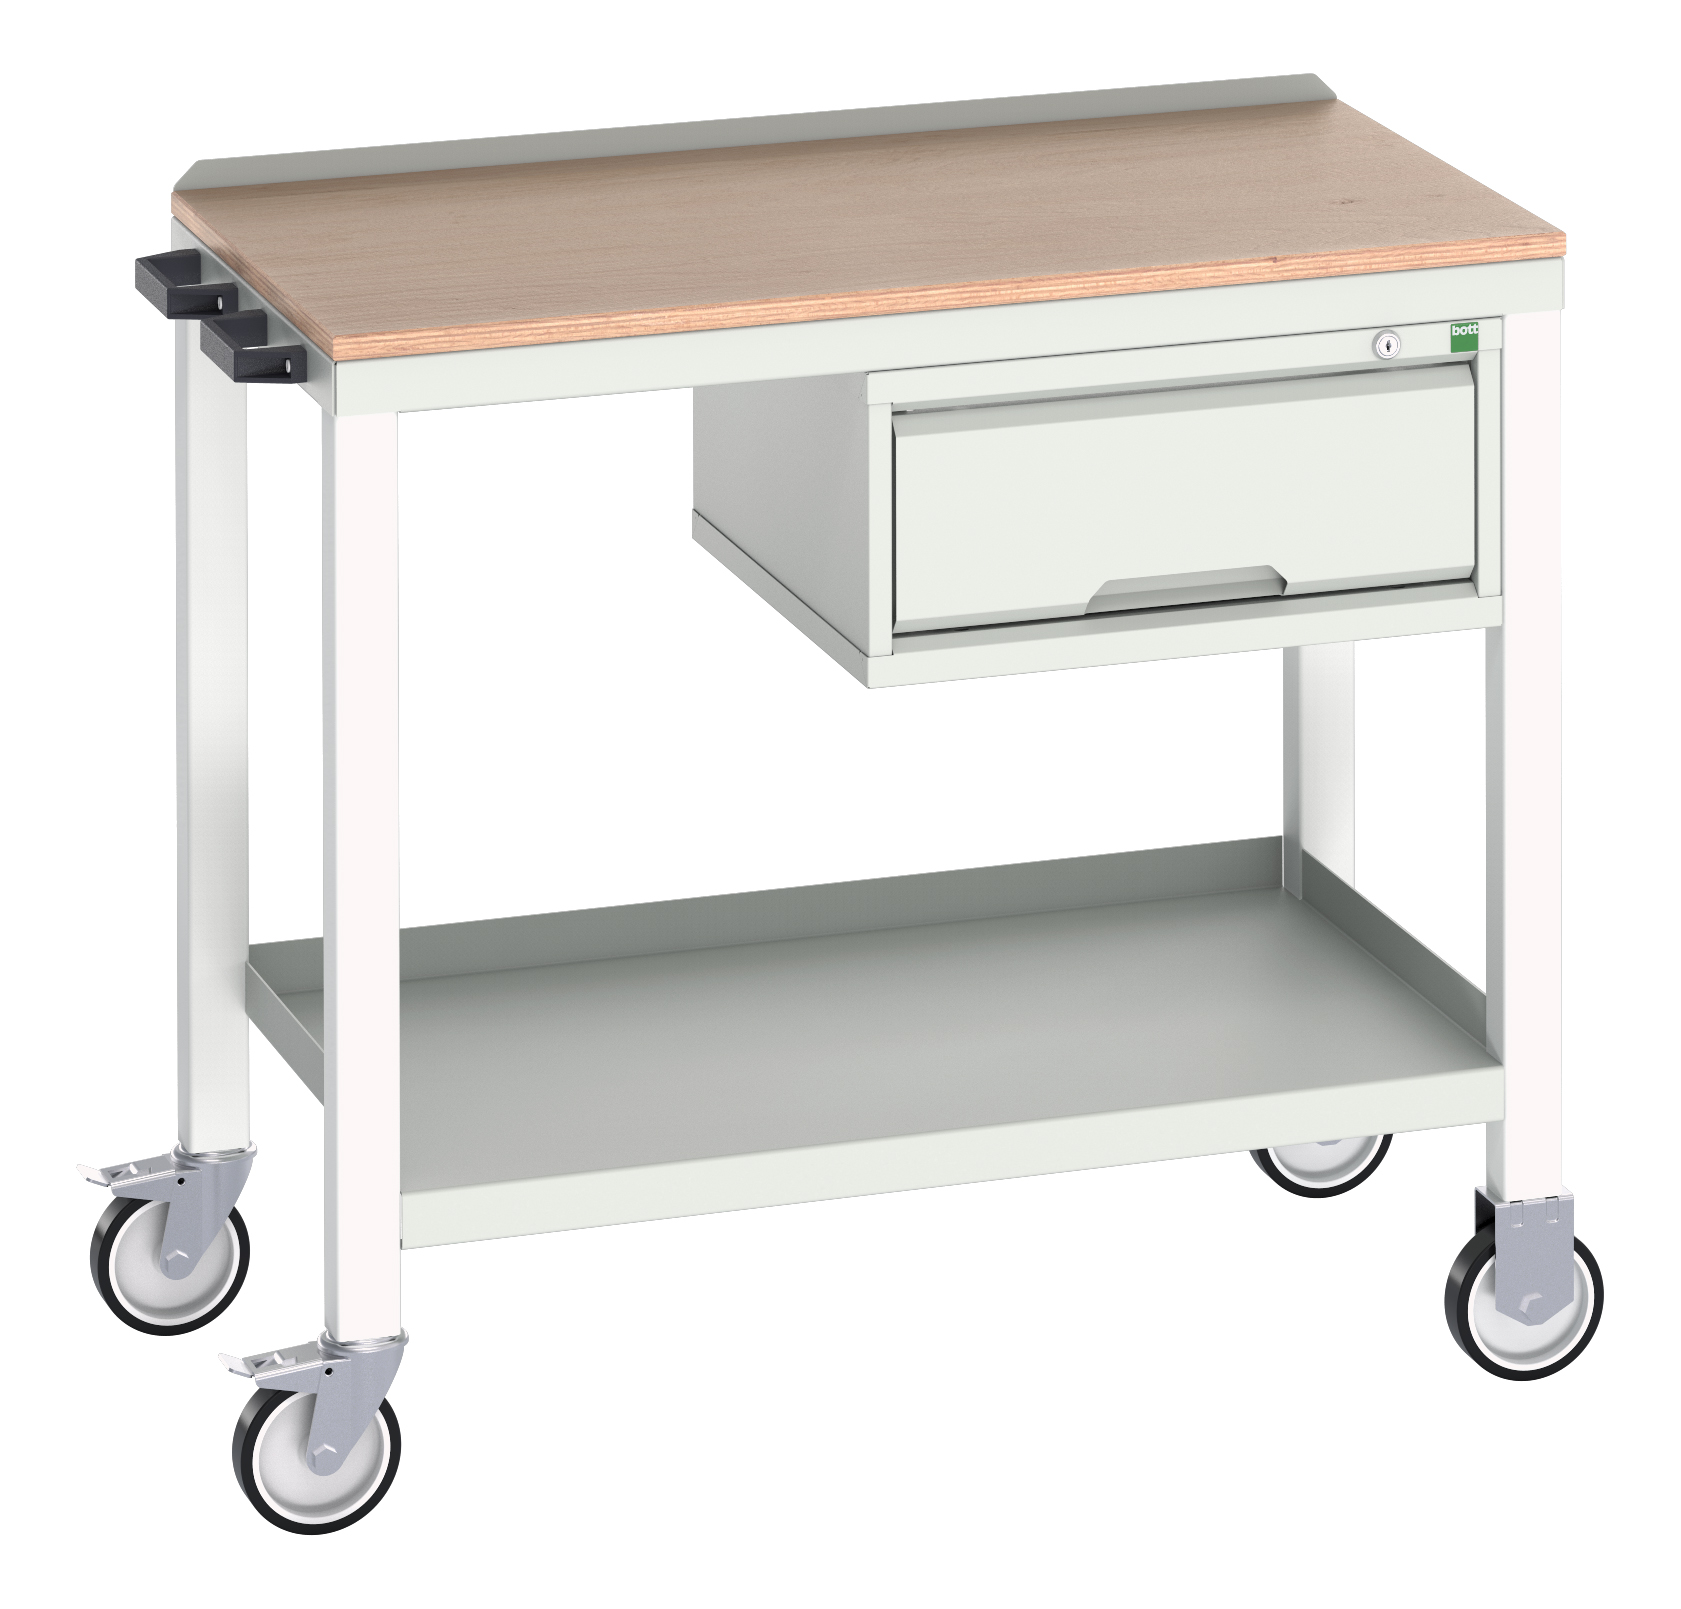 Bott Verso Mobile Welded Bench With 1 Drawer Cabinet - 16922801.16